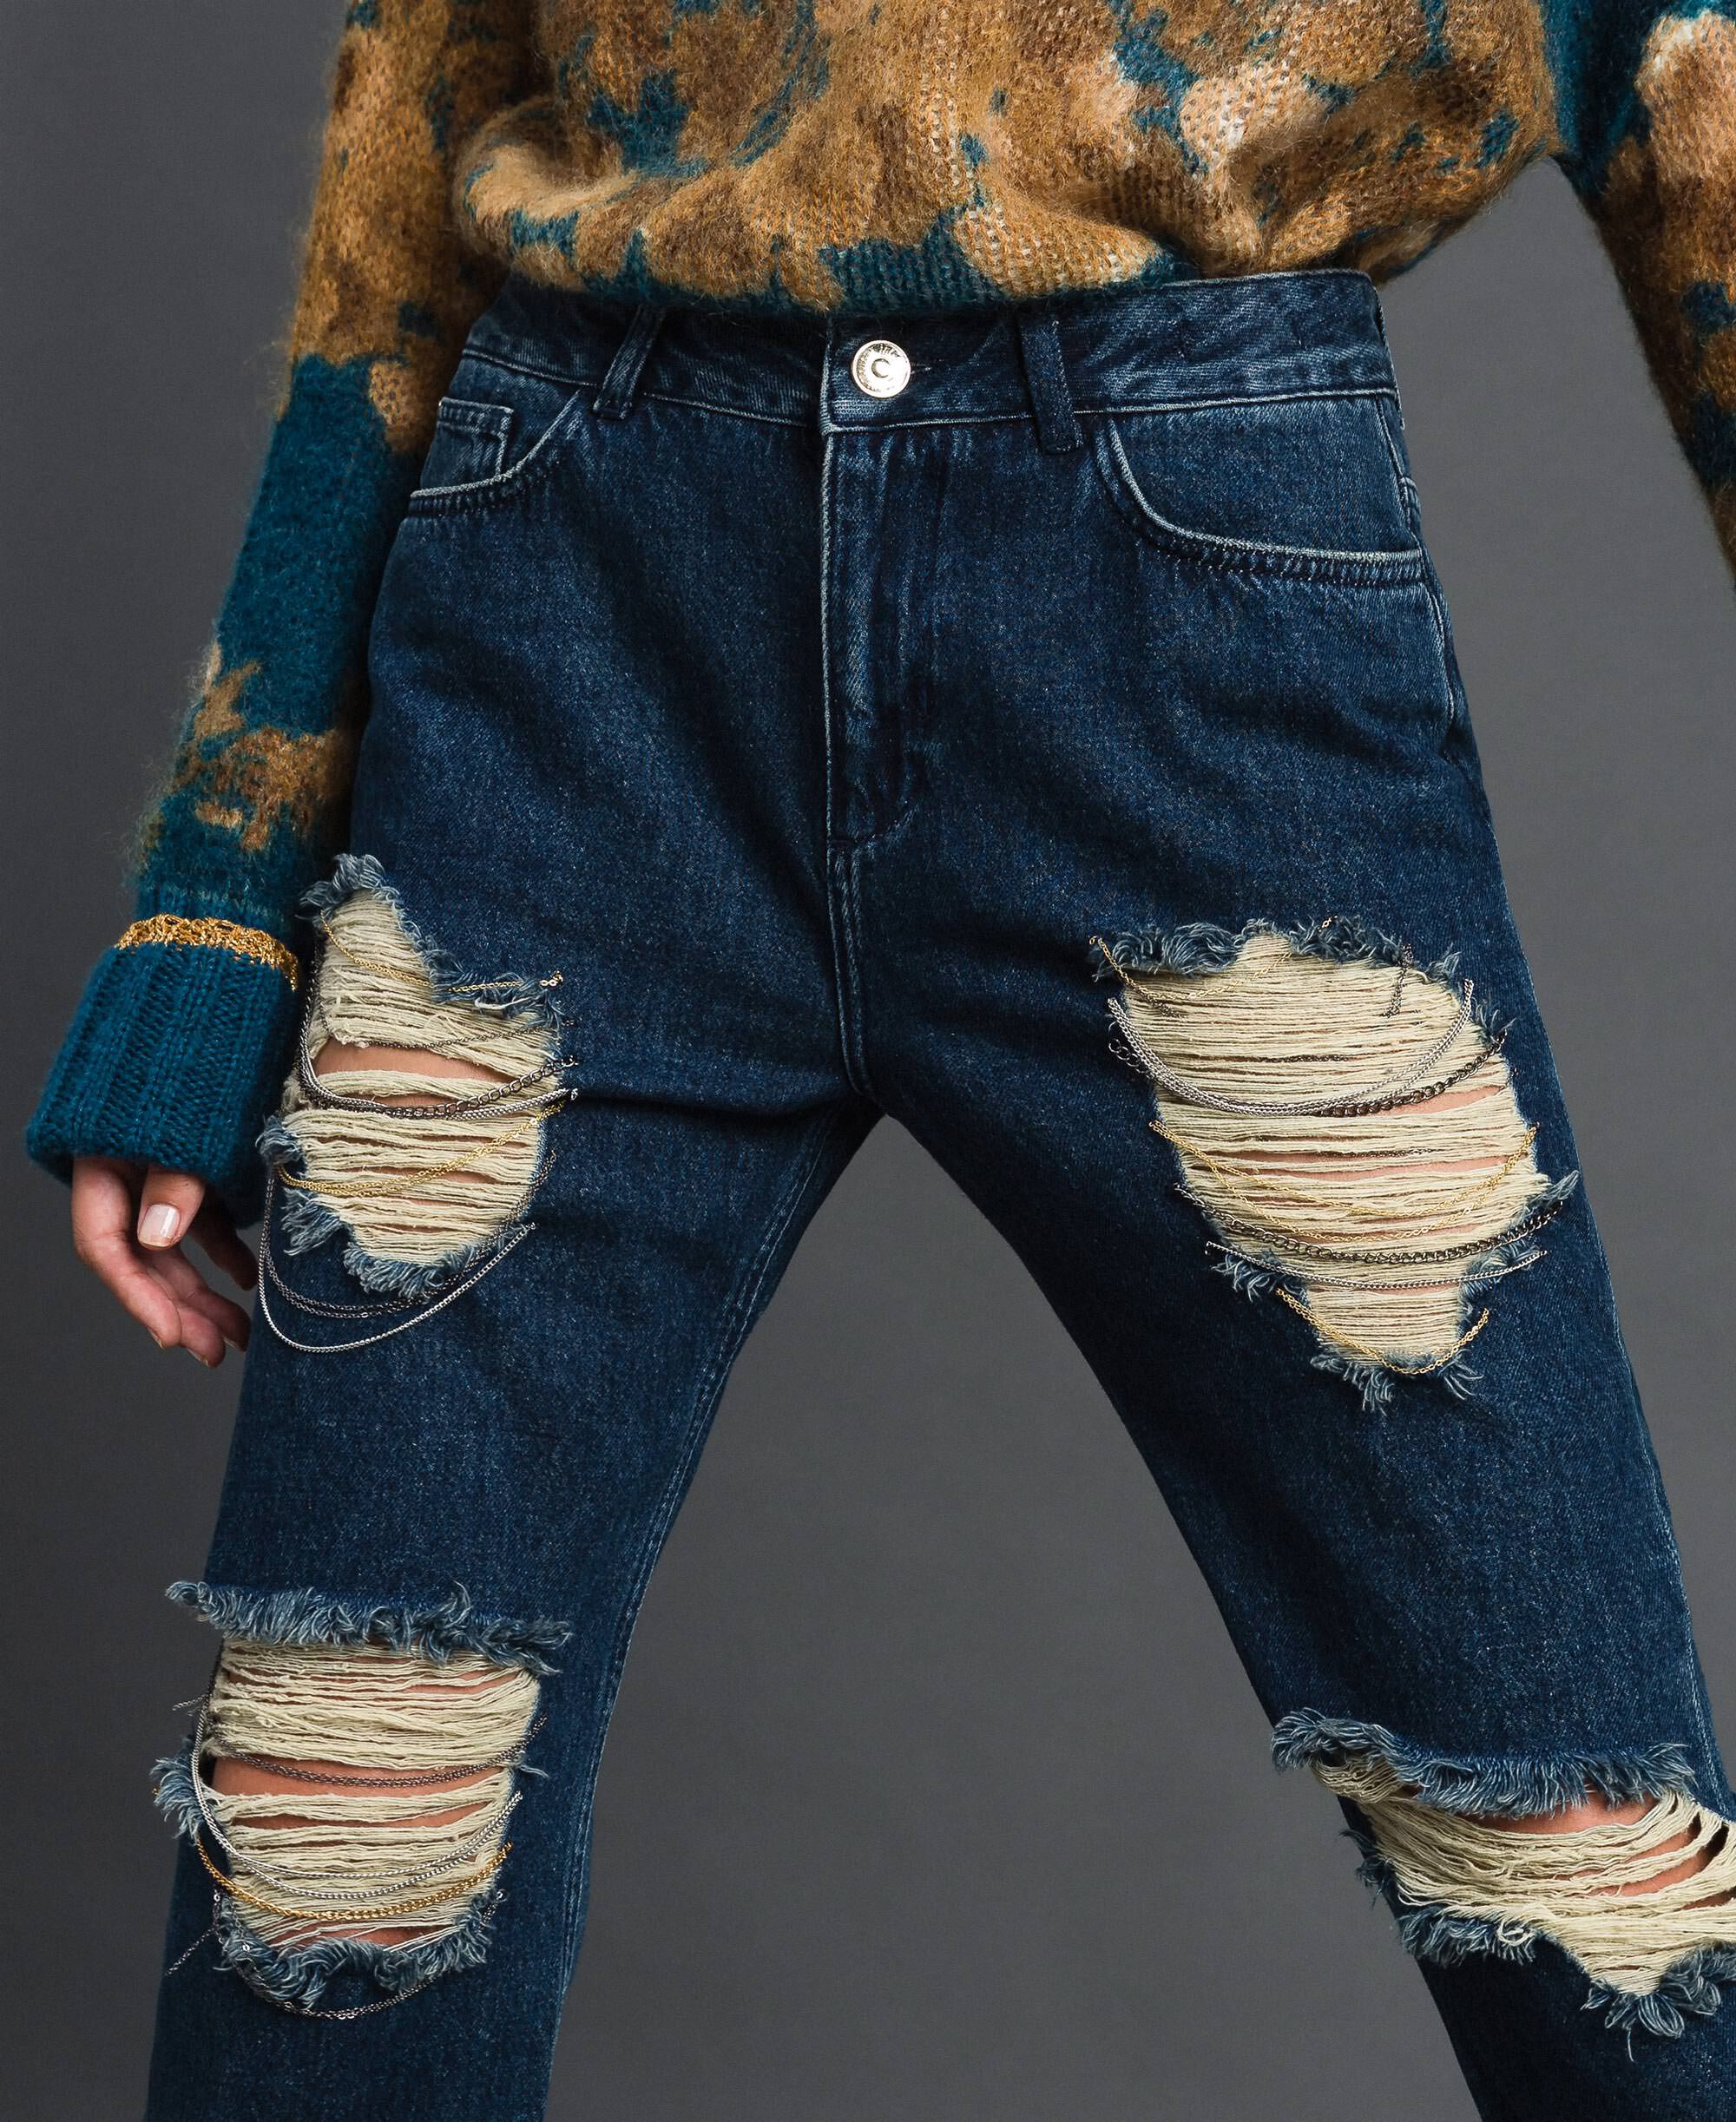 jeans with rips and chains